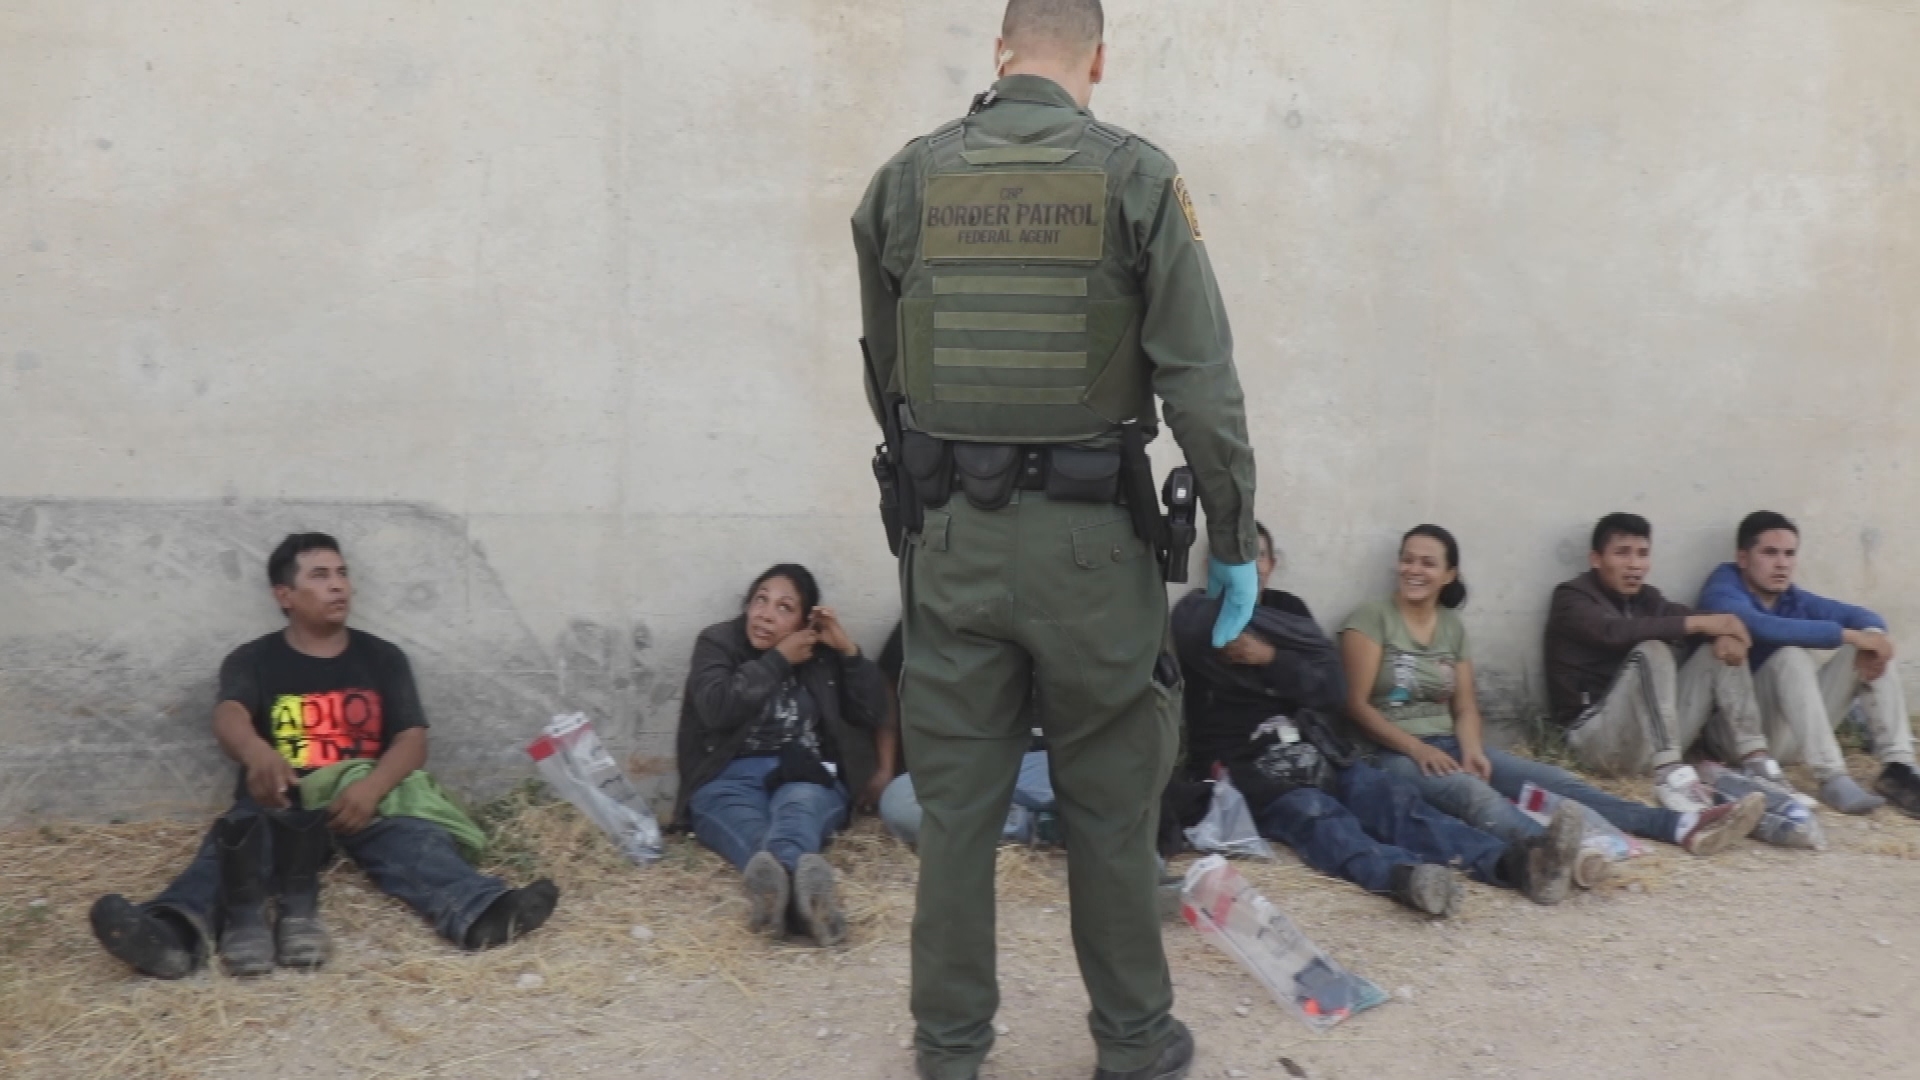 Desperate families flee Central America to seek asylum in the US